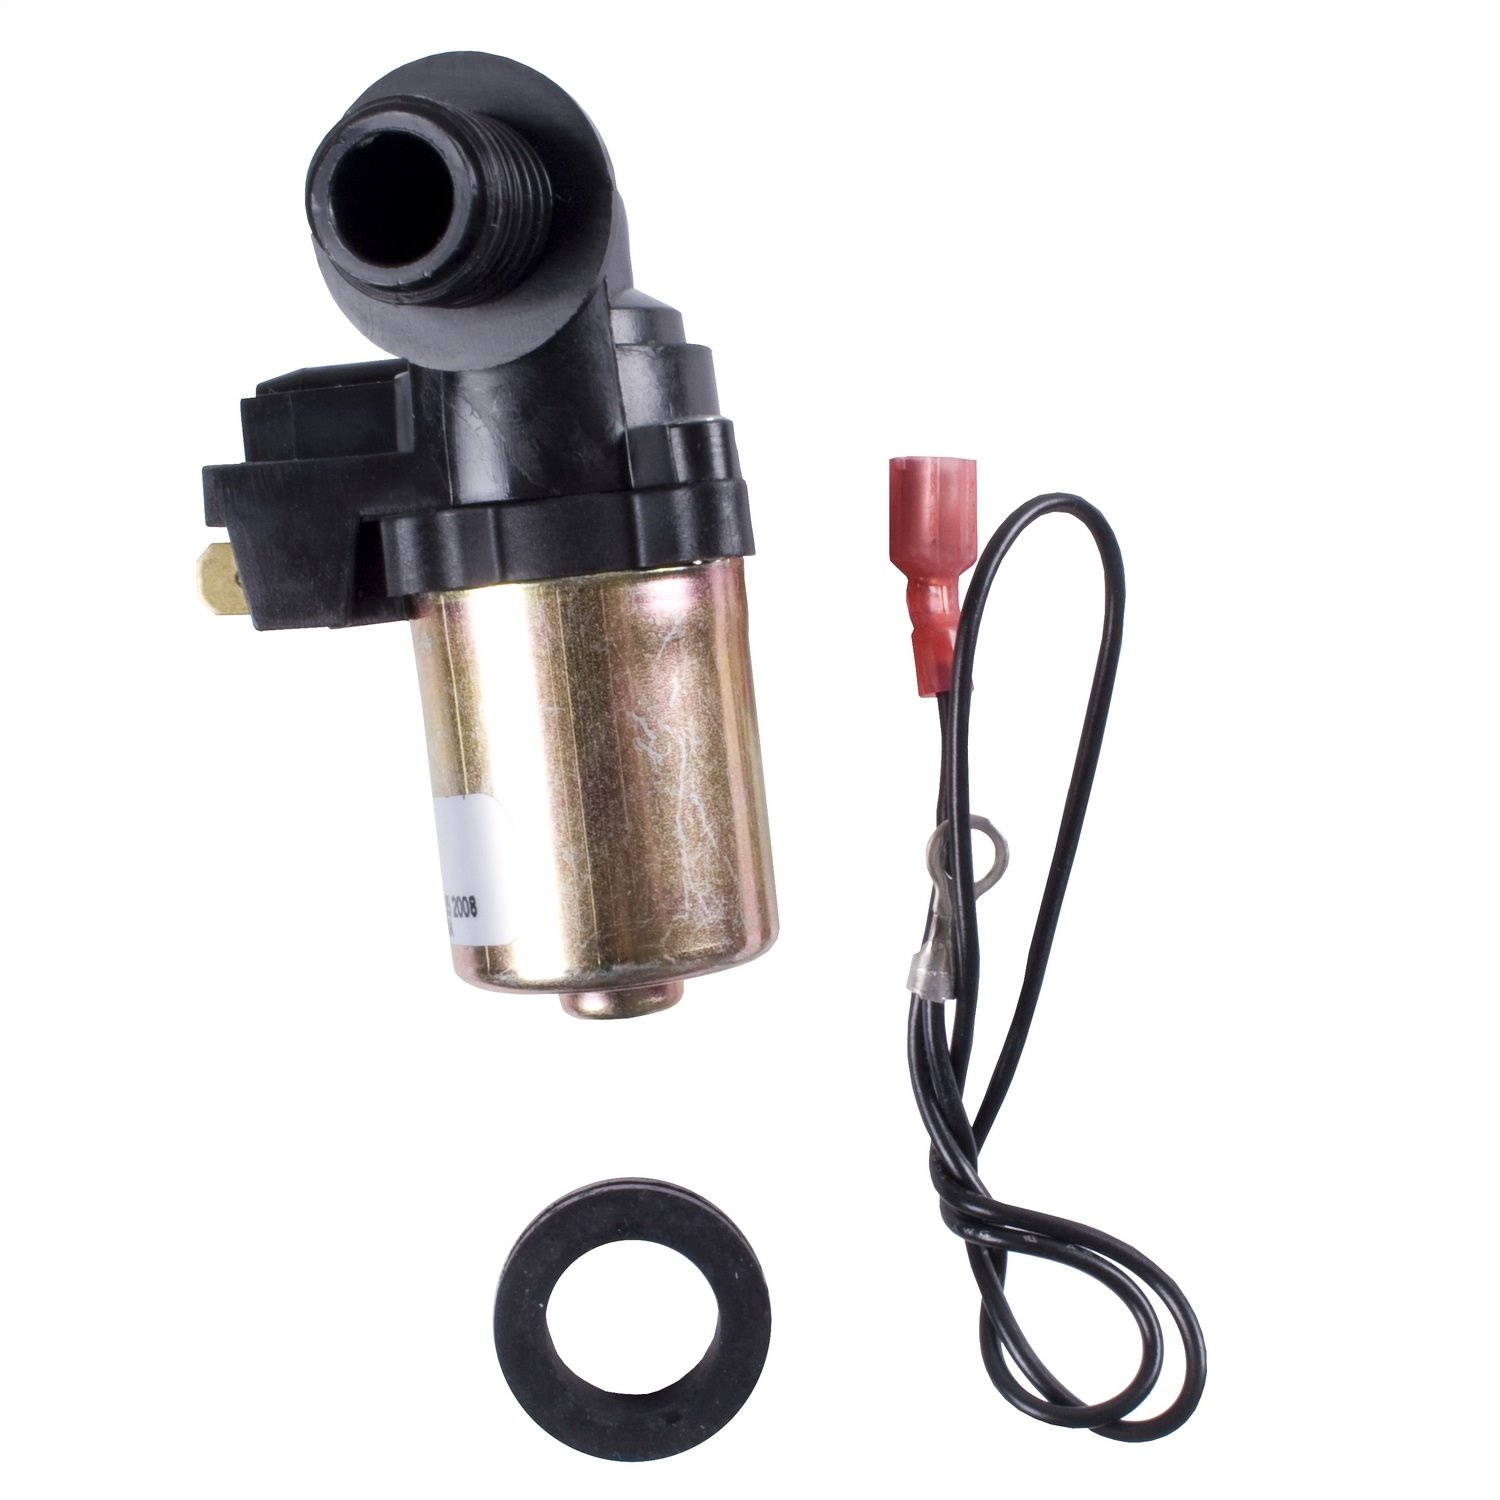 Replacement windshield washer pump from Omix-ADA, Fits 72-86 Jeep CJ and SJ models